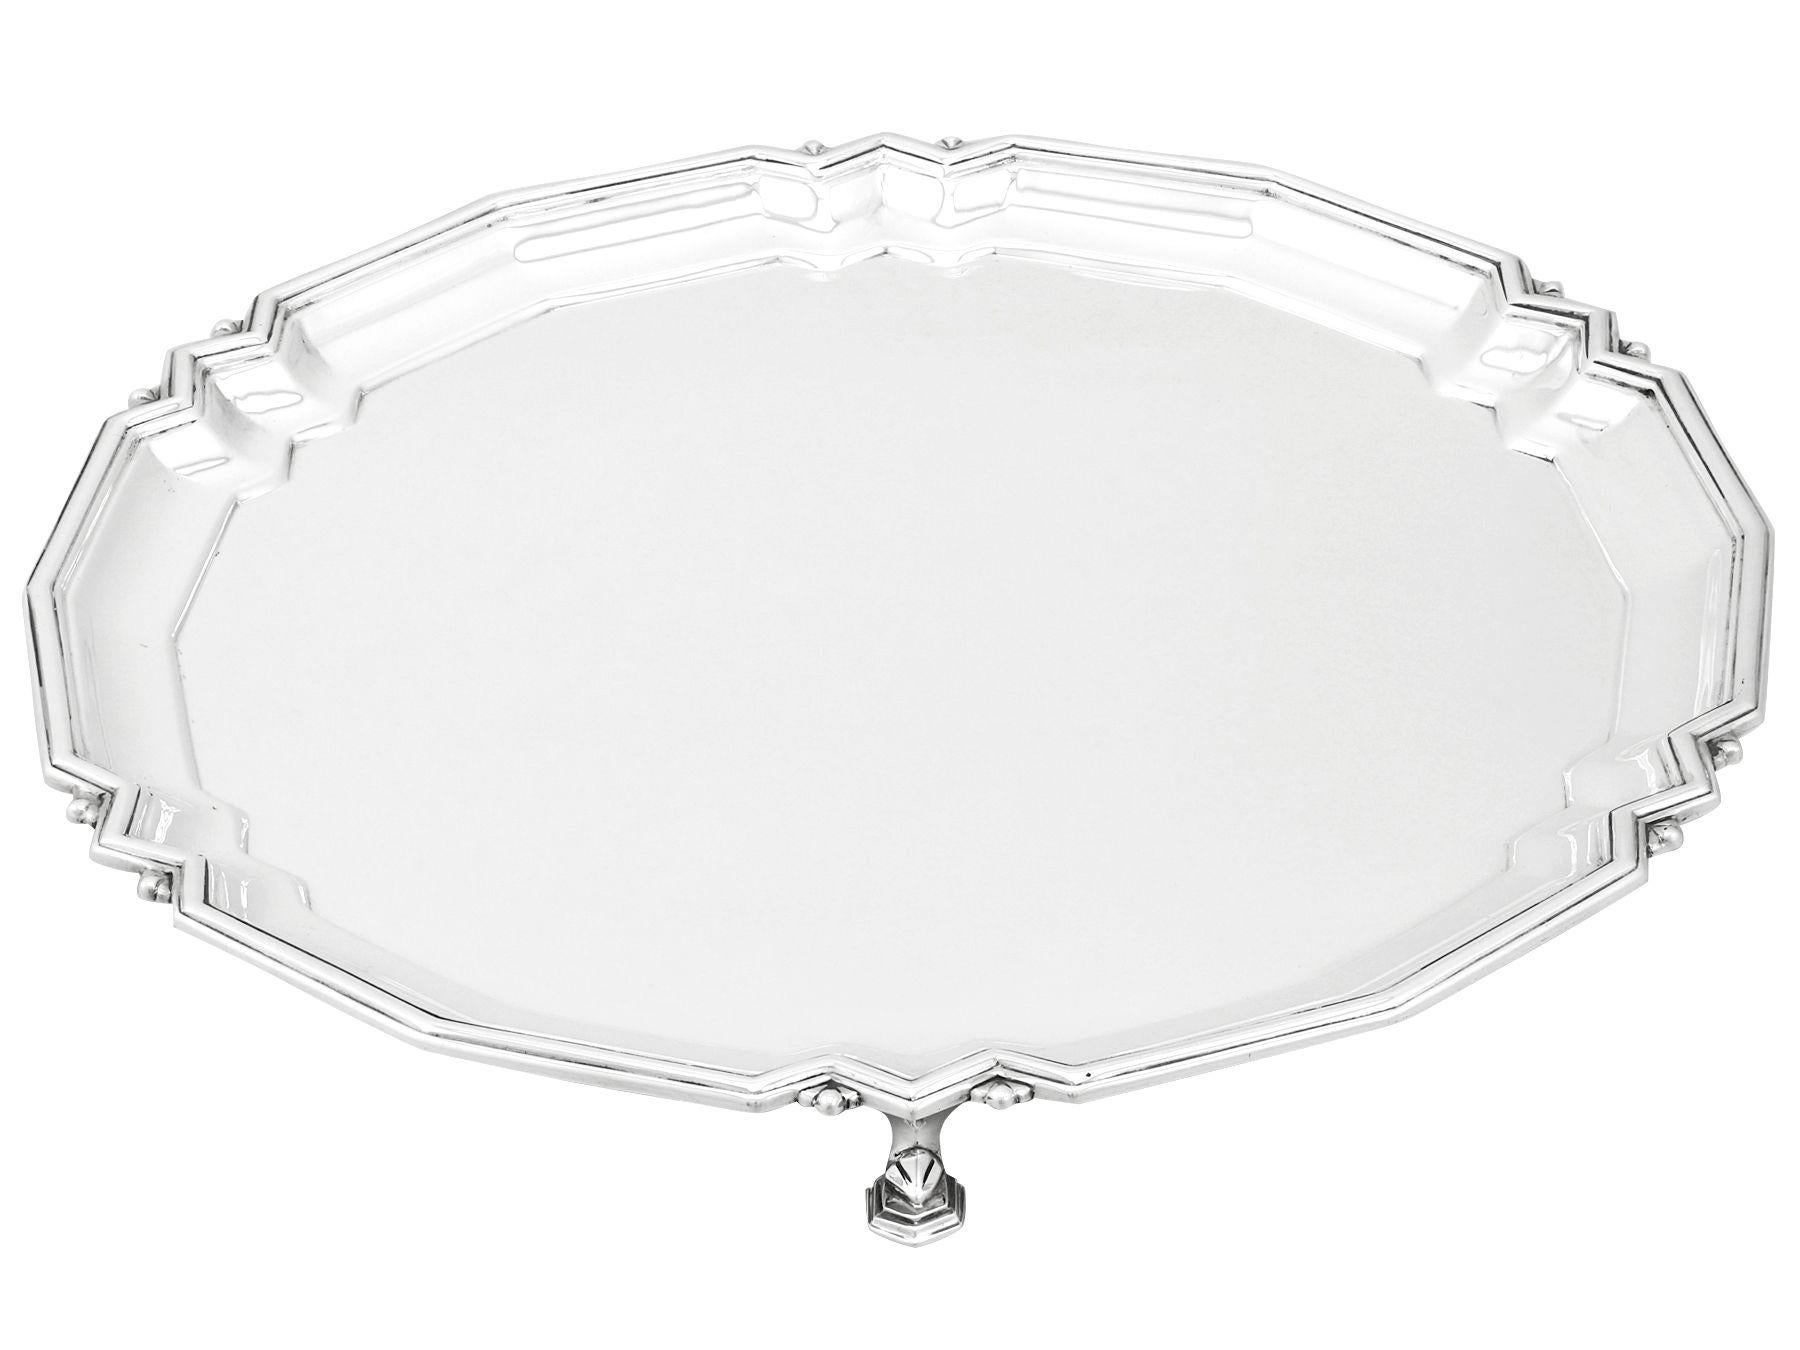 An exceptional, fine and impressive antique George V English sterling silver salver made by Mappin & Webb Ltd, in the Art Deco style; an addition to our silver dining collection.

This exceptional antique George V English sterling silver salver has